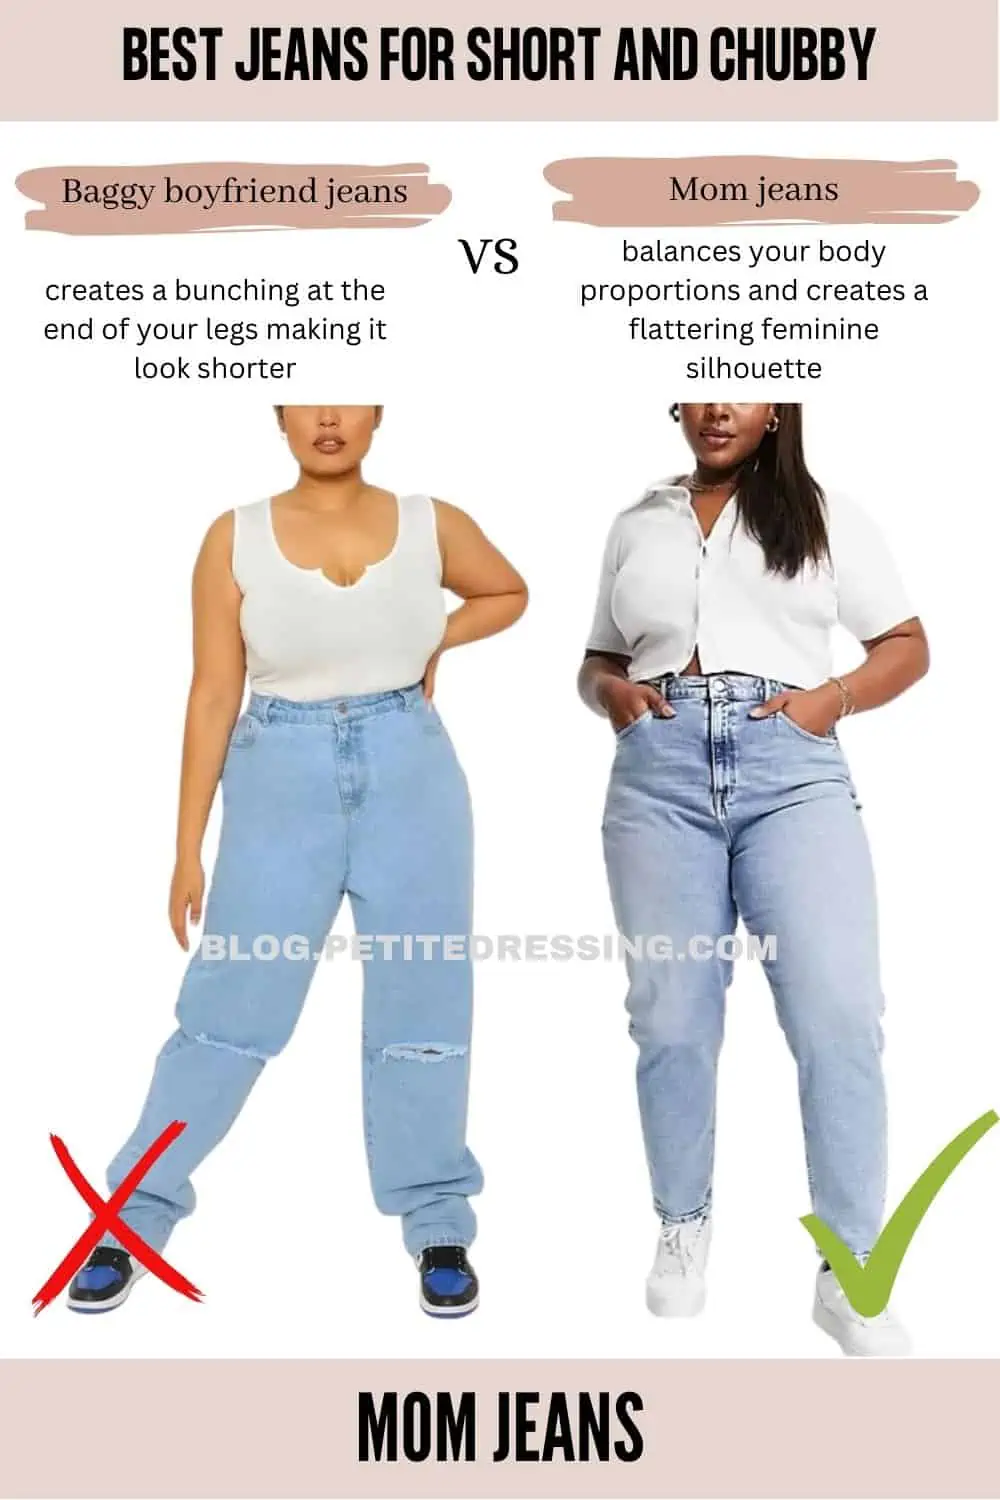 Jeans Guide For Short And Chubby